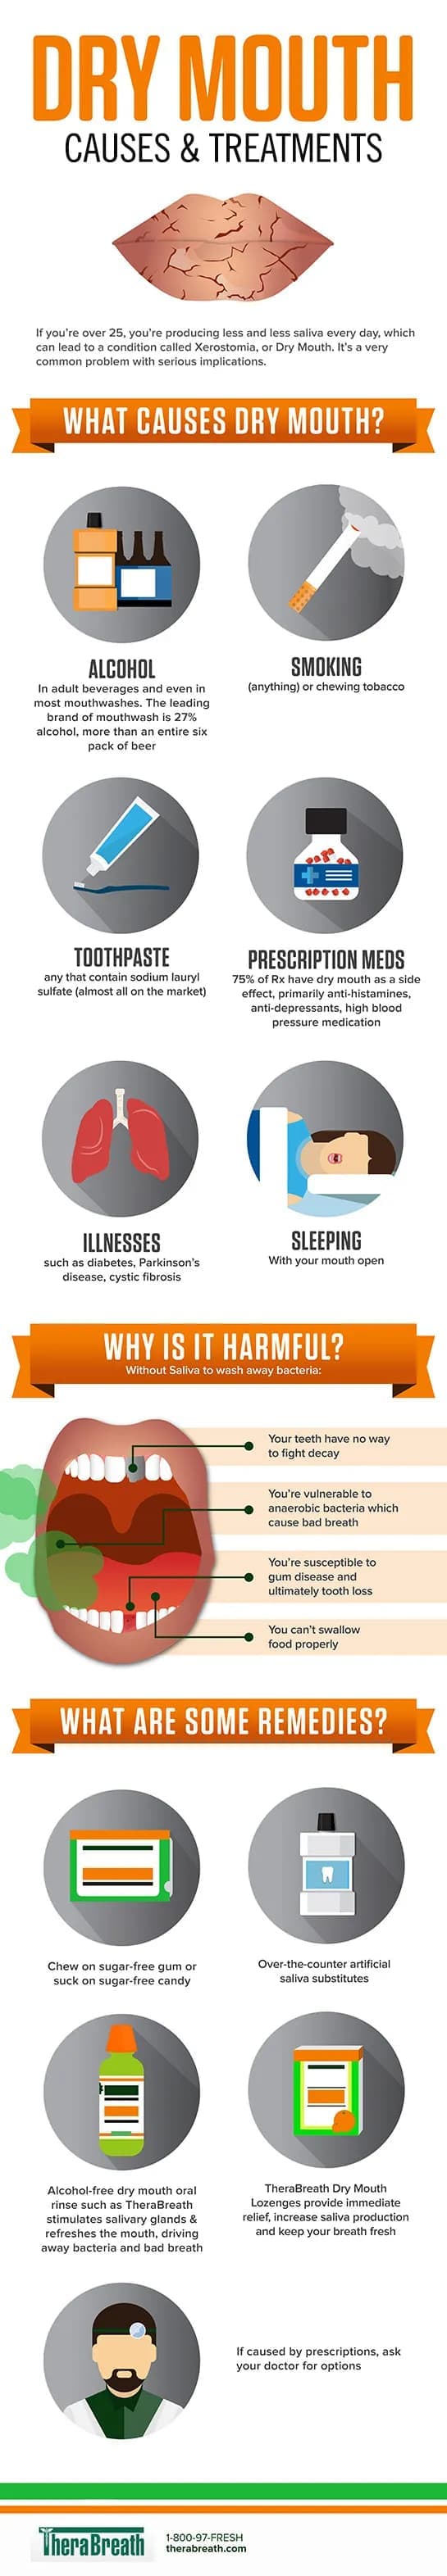 Full-size image of the Dry Mouth Causes and Treatments infographic